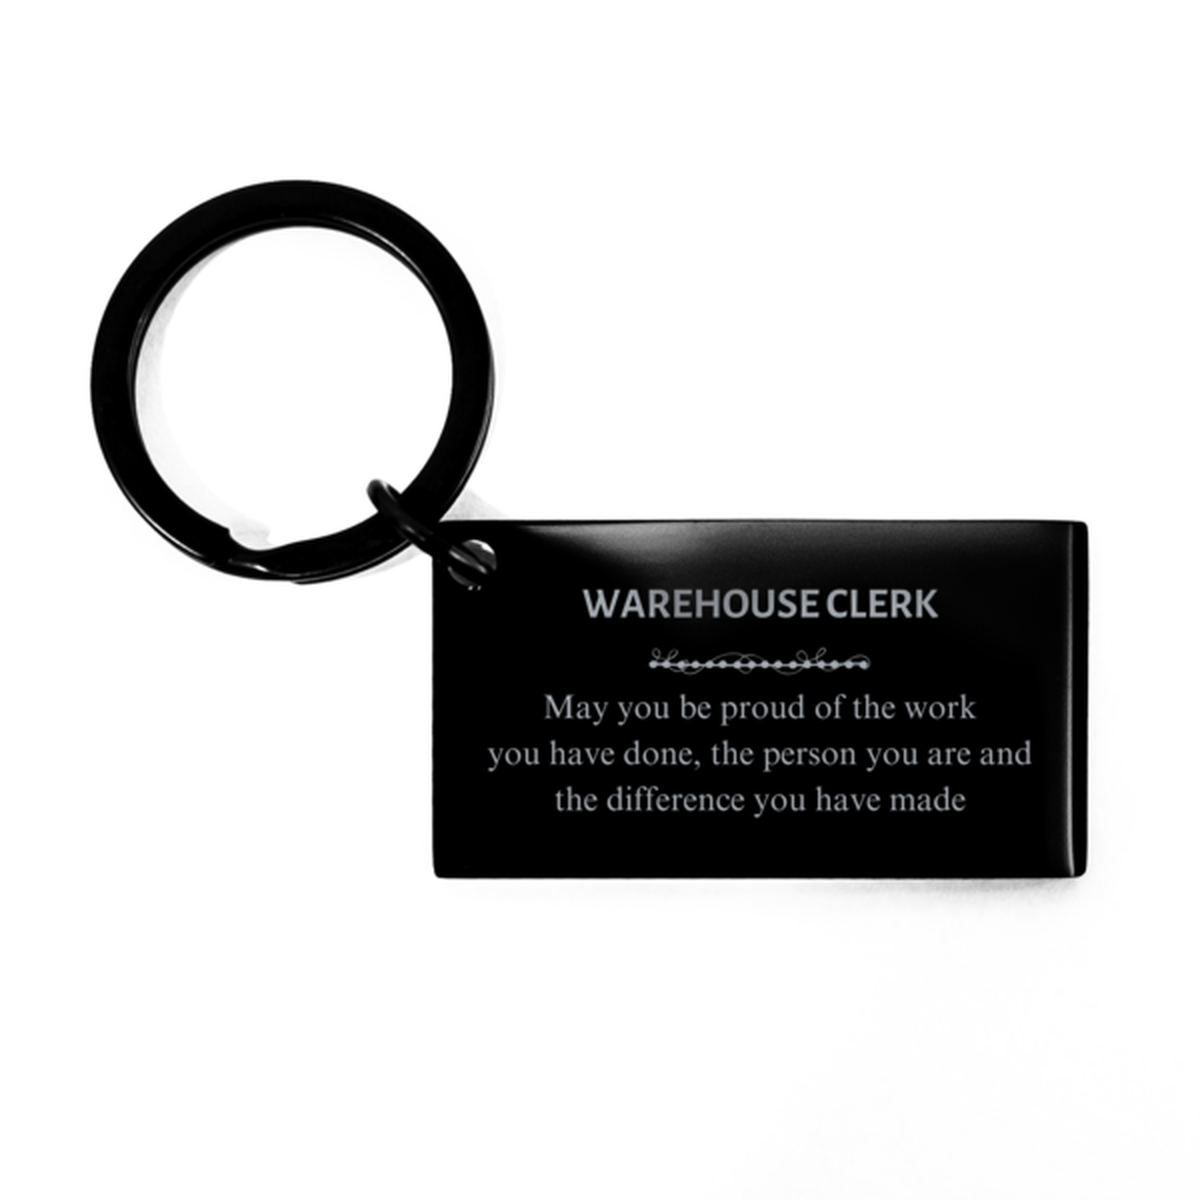 Architect May you be proud of the work you have done, Retirement Warehouse Clerk Keychain for Colleague Appreciation Gifts Amazing for Warehouse Clerk